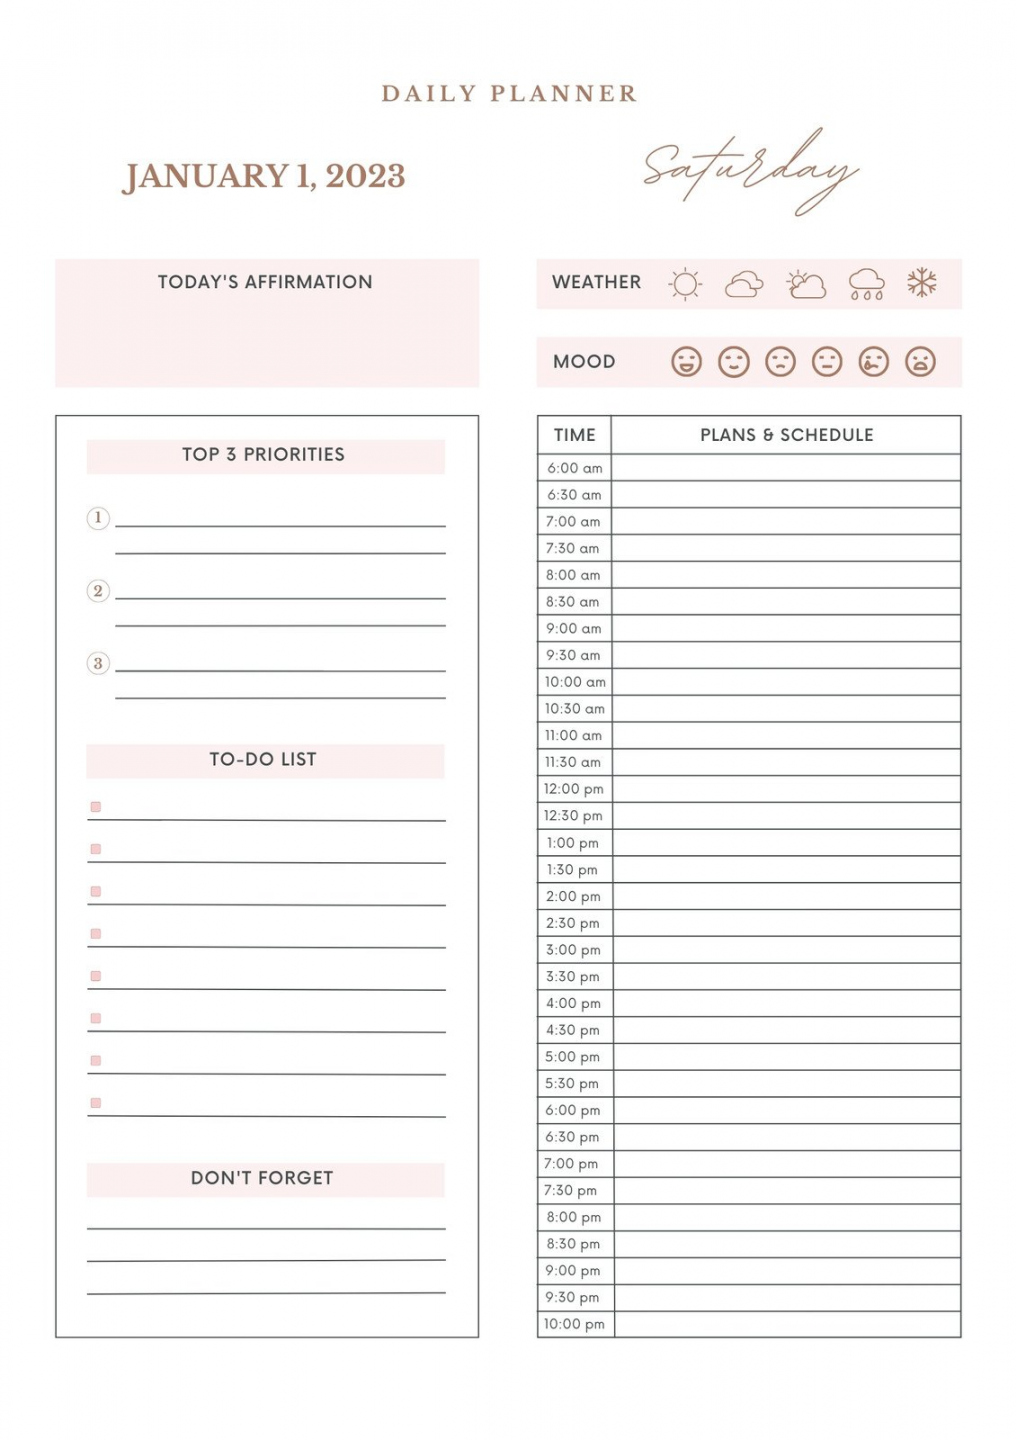 Free Daily Planner Printable - Printable - Free daily planner templates to customize  Canva